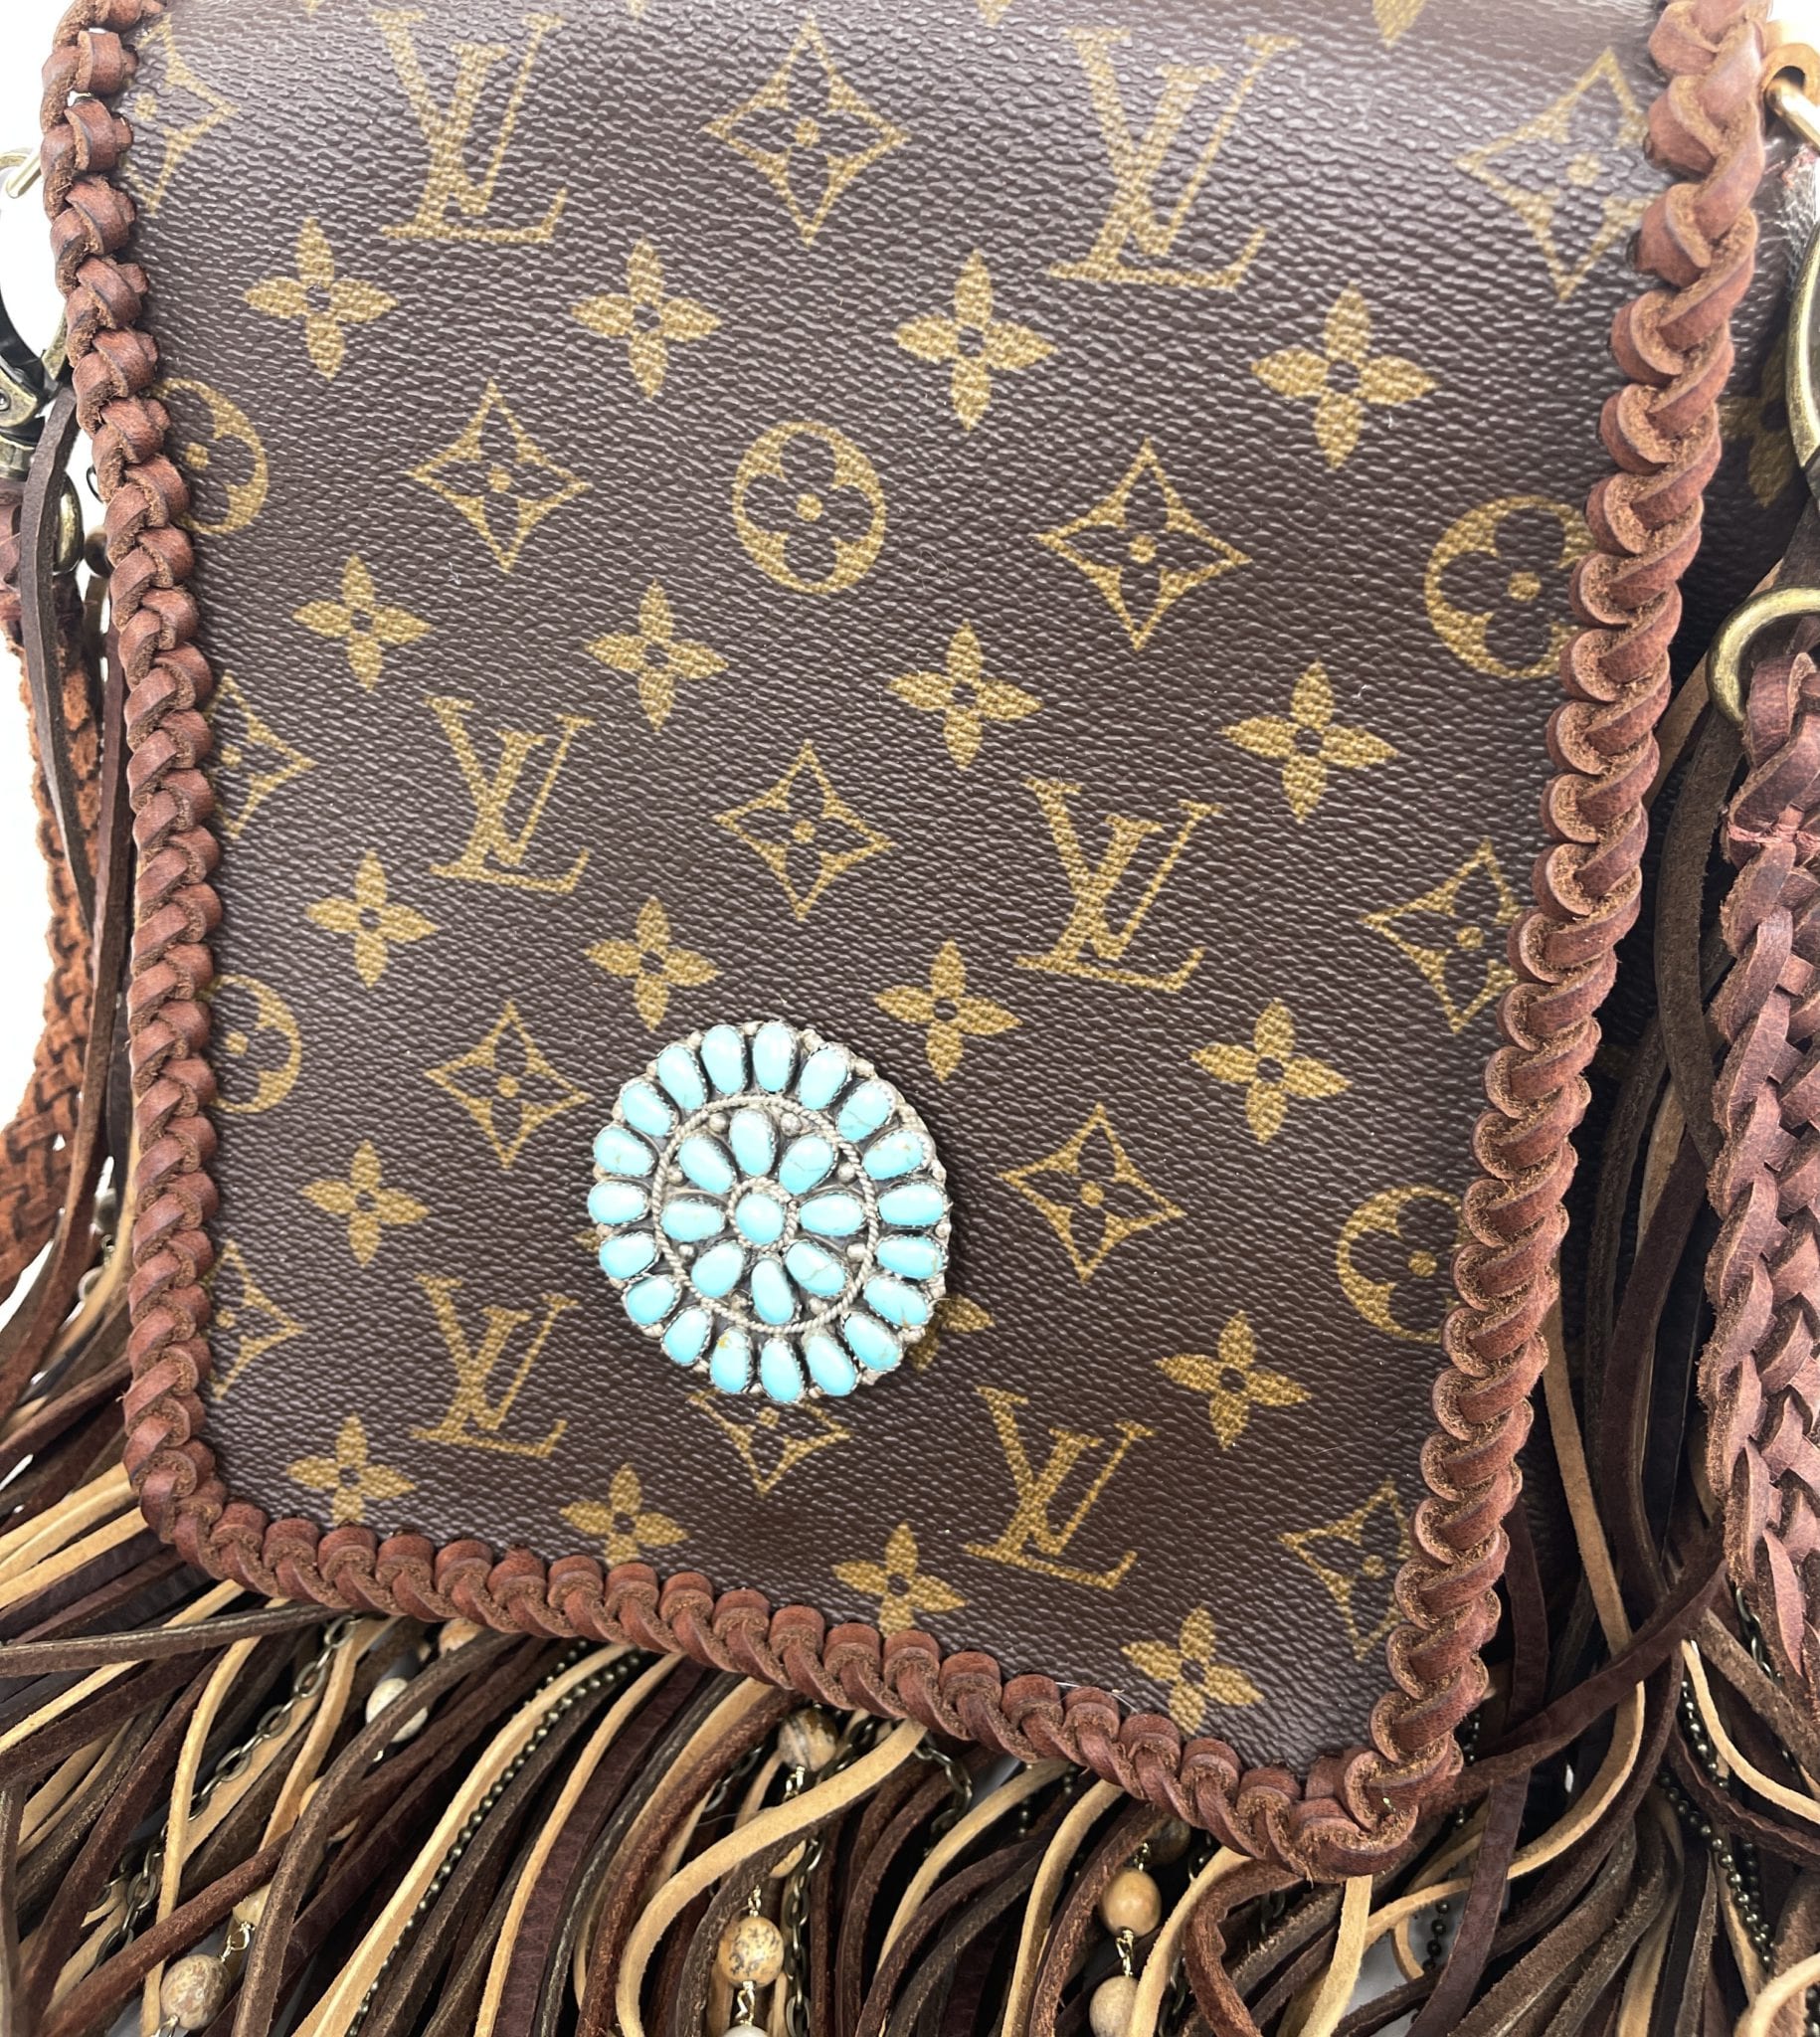 Louis Vuitton, Bags, Louis Vuitton Classic Monogram Upcycled Distressed  Leather Fringe Crossbody